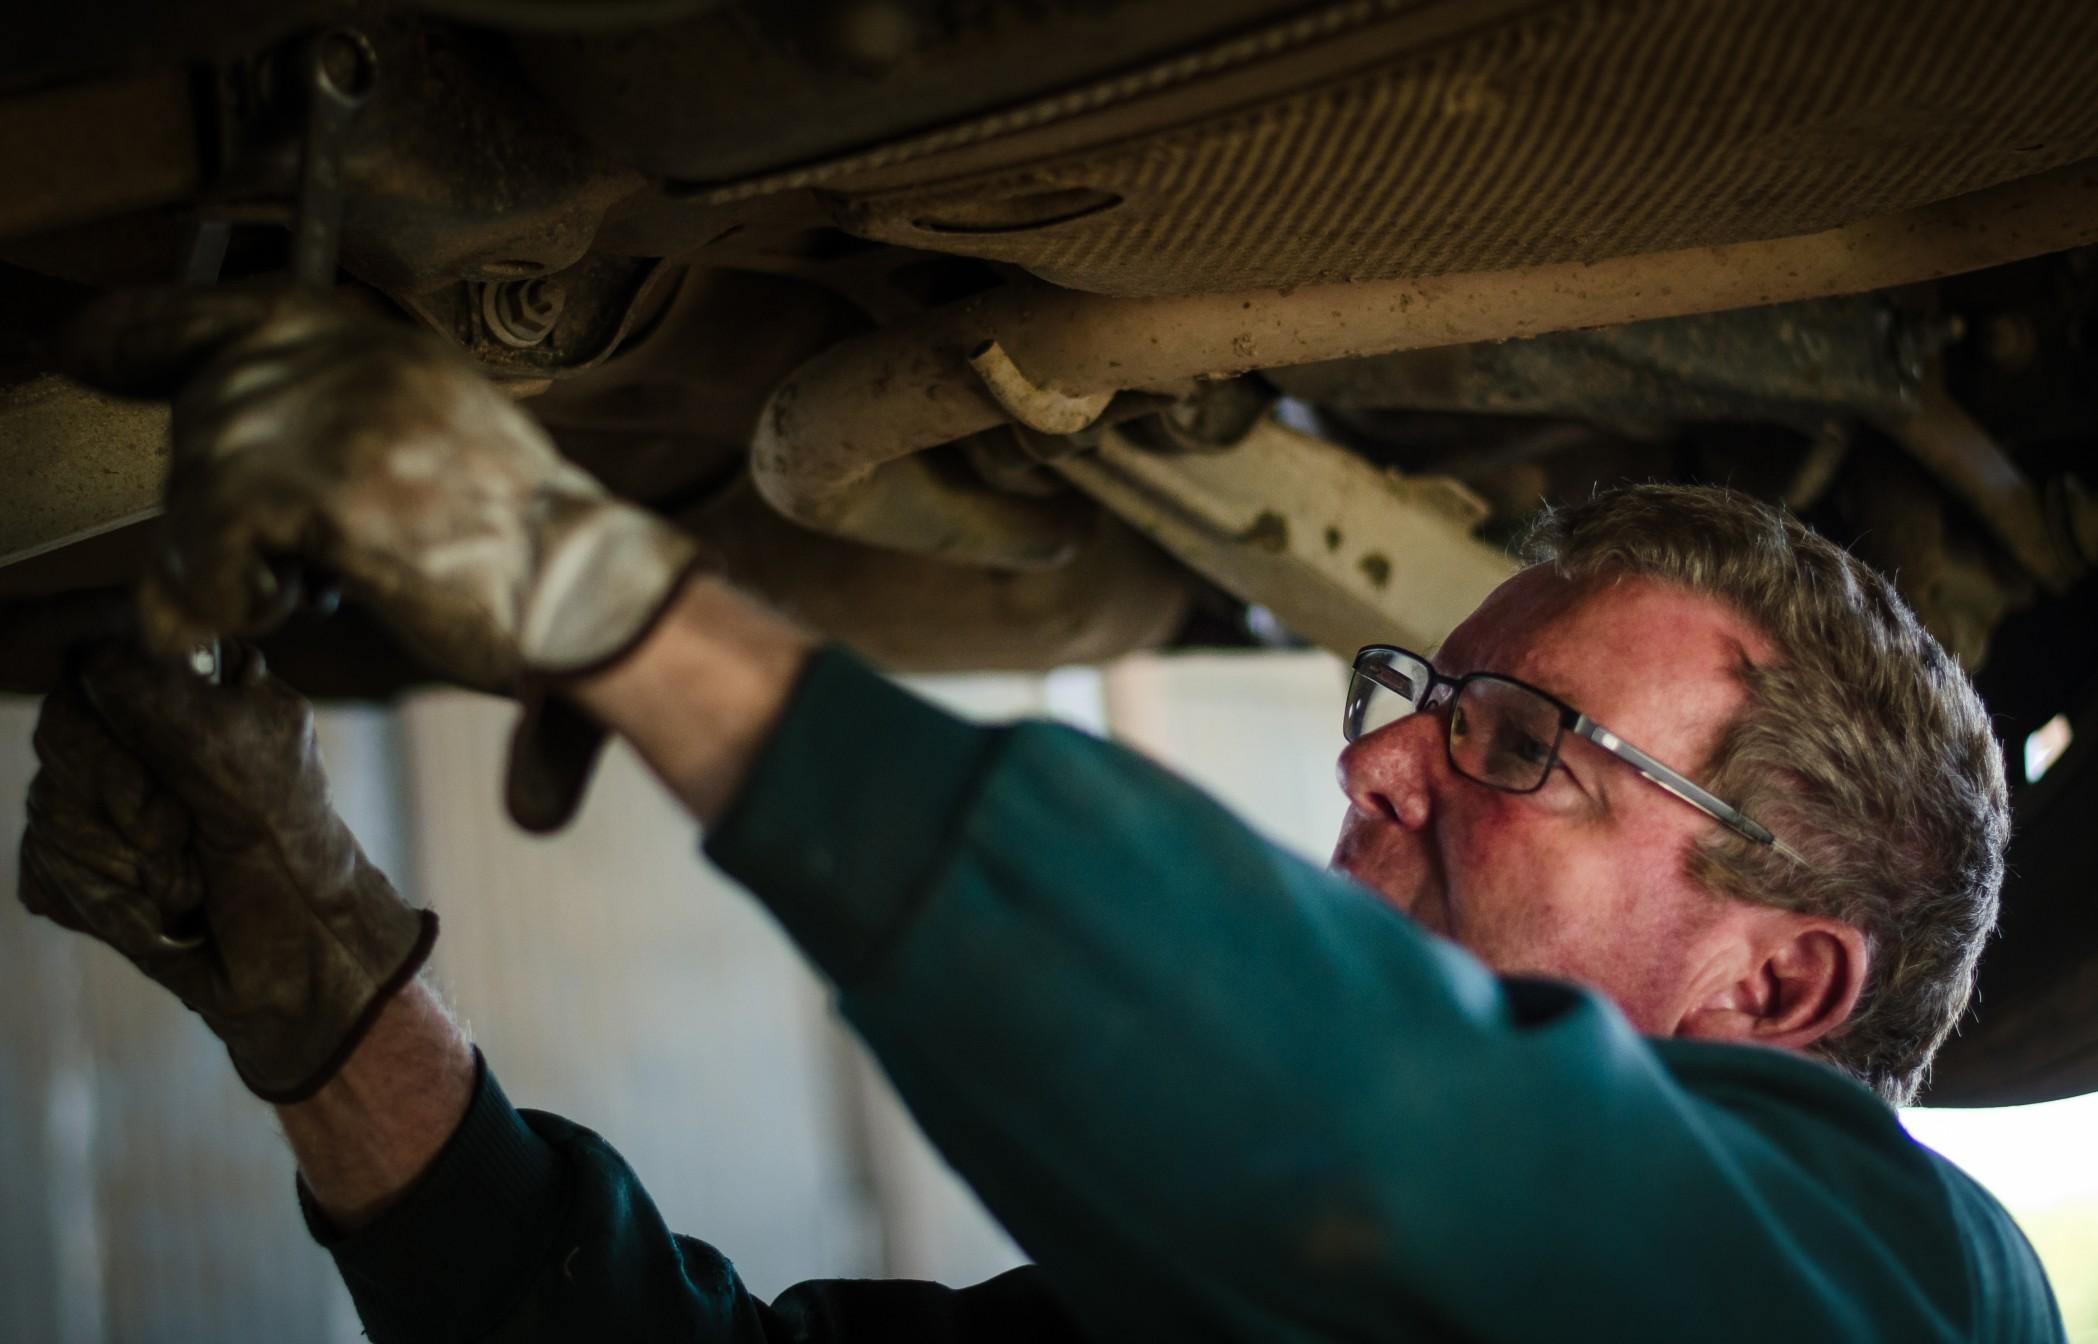 The United States is currently seeing a shortage in car repair technicians.